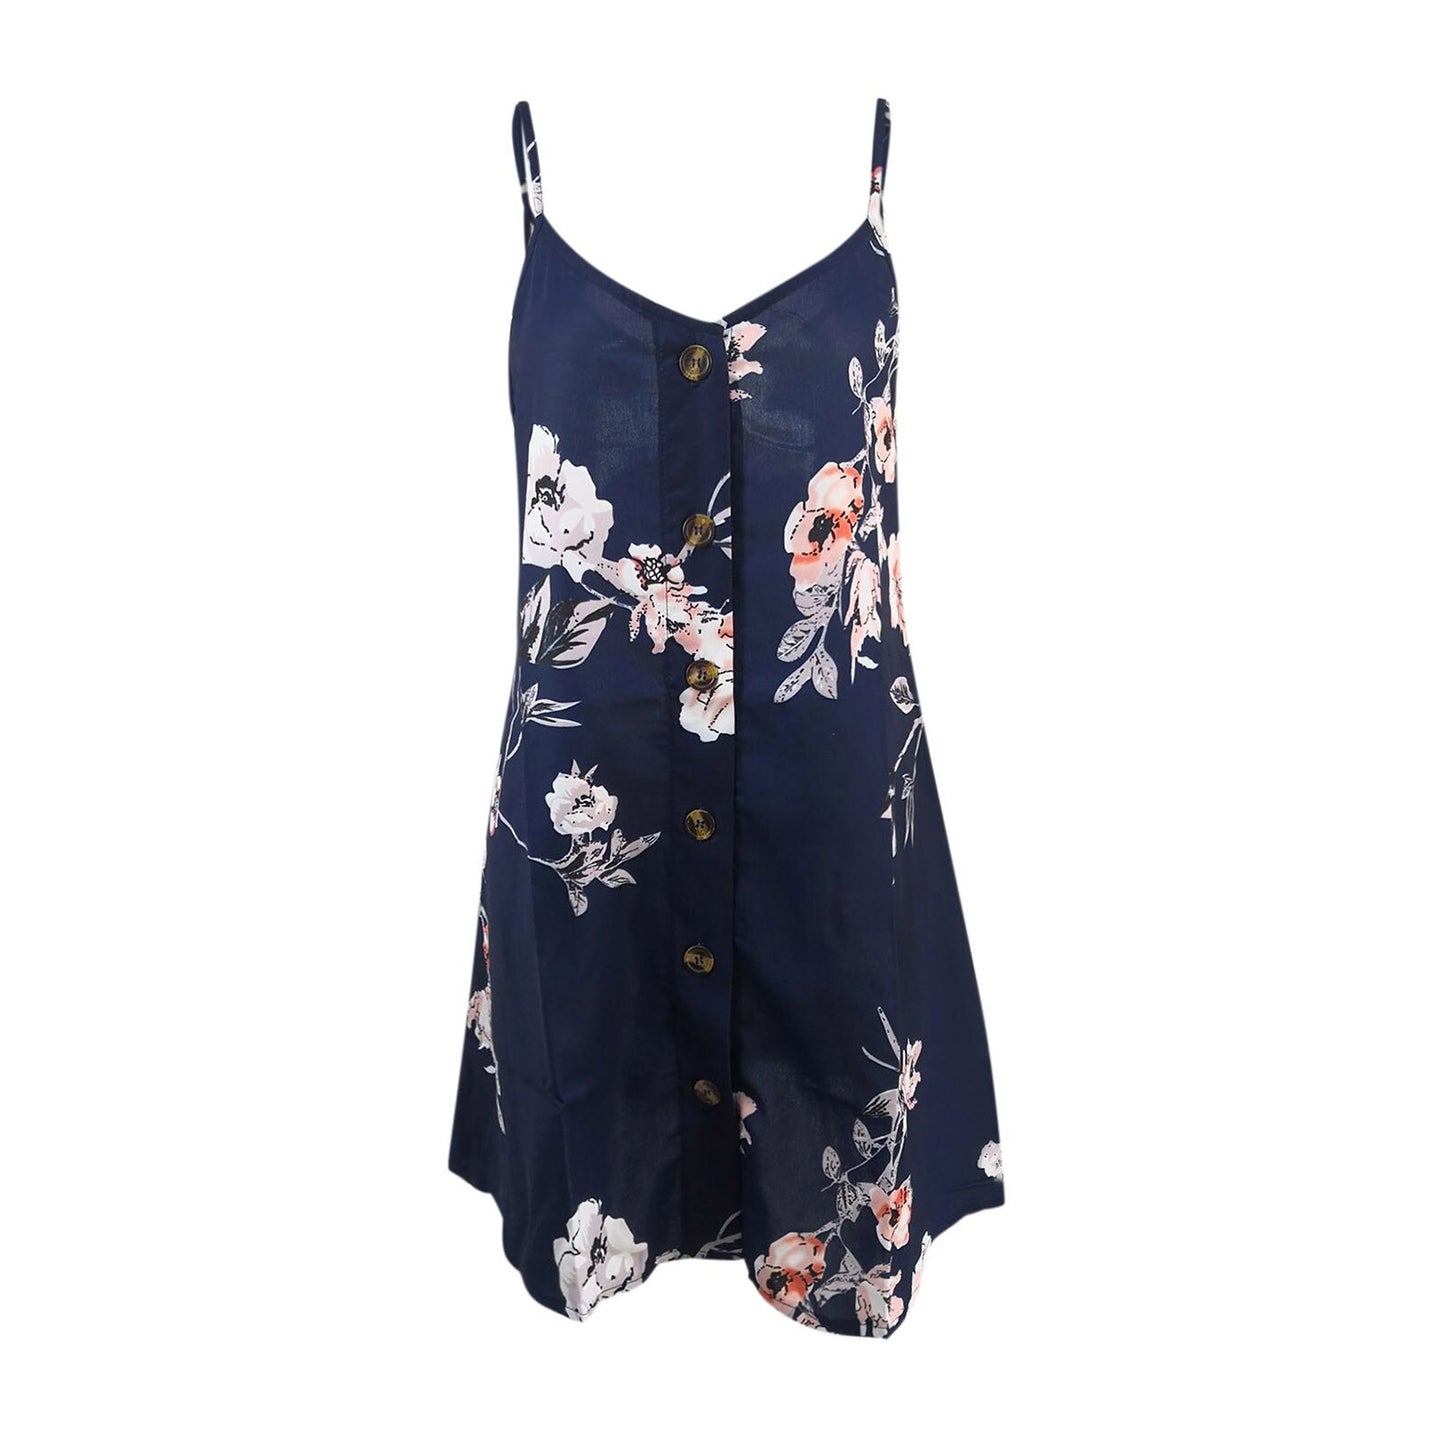 Women Summer Leisure Time On Vacation Mini Dress Sexy Floral Print Sleeveless Backless Camisole Dresses Casual V-Neck Vestidos